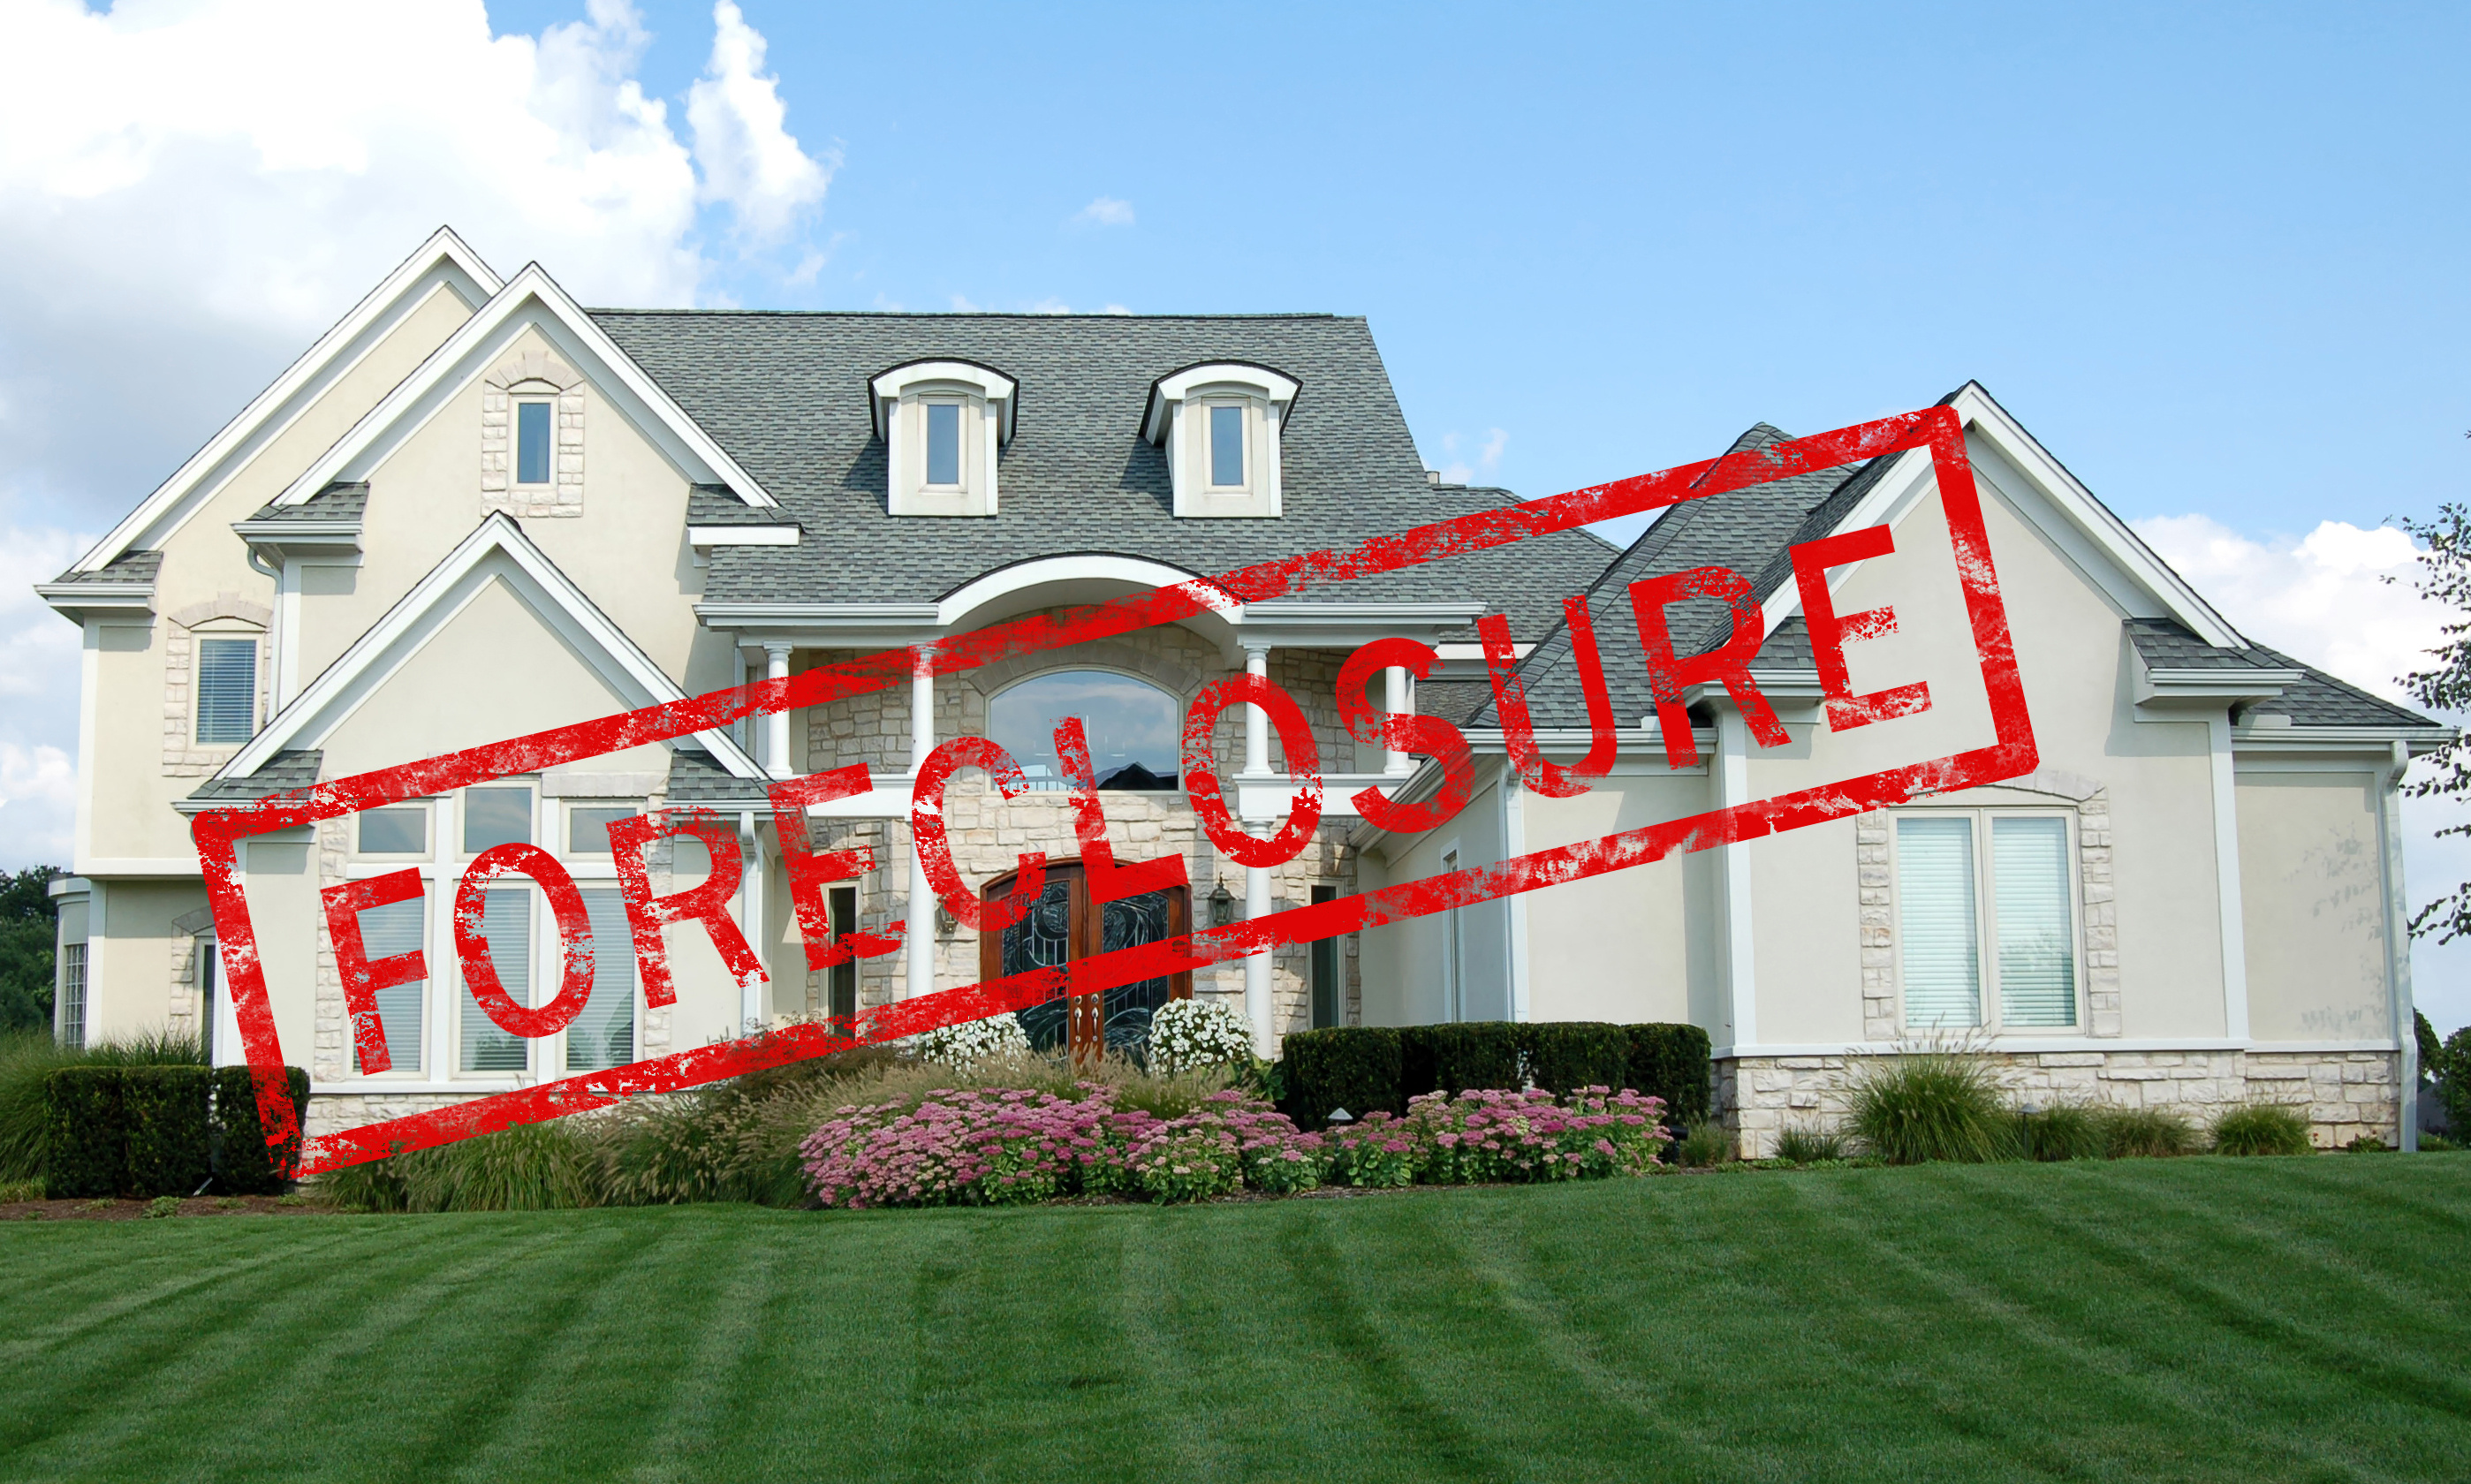 Call GDB Appraisal Services, Inc when you need appraisals of El Paso foreclosures